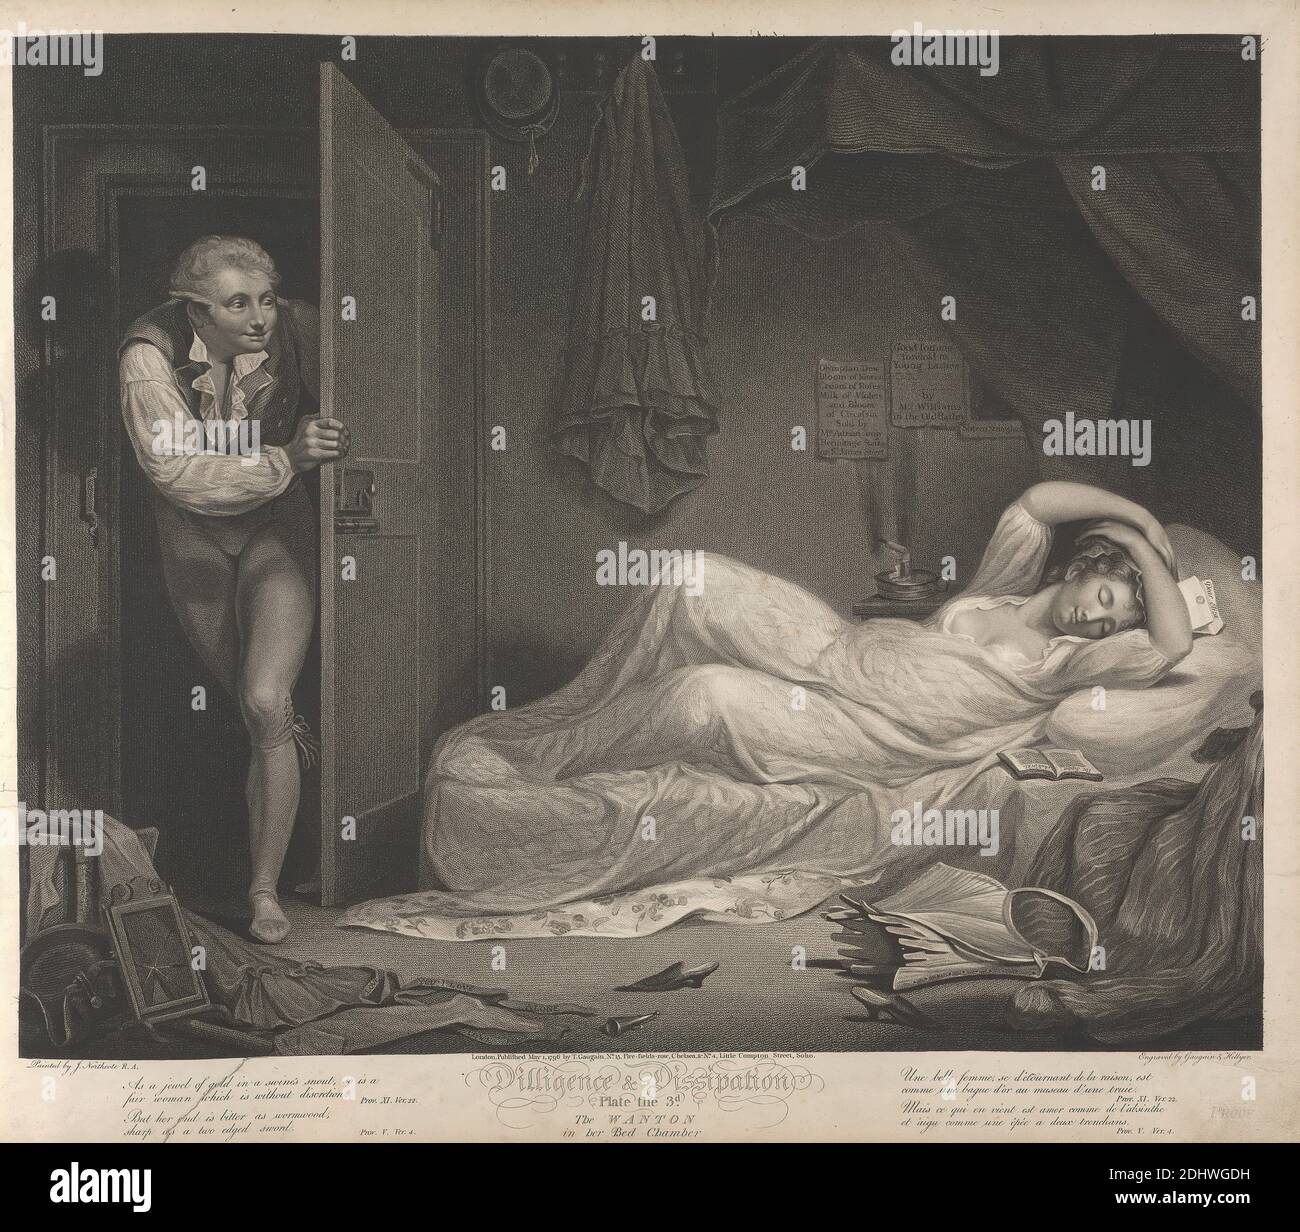 Diligence and Dissipation: The Wanton in her Bed Chamber (Plate 3), Print made by Thomas Gaugain, 1748–1812, French, and Thomas Hellyer, active 1800, British, after James Northcote, 1746–1831, British, 1797, Stipple engraving, open letter proofs, Sheet: 18 1/2 x 20 13/16in. (47 x 52.9cm), bedroom, corset, literary theme, nightgown, sleeping Stock Photo